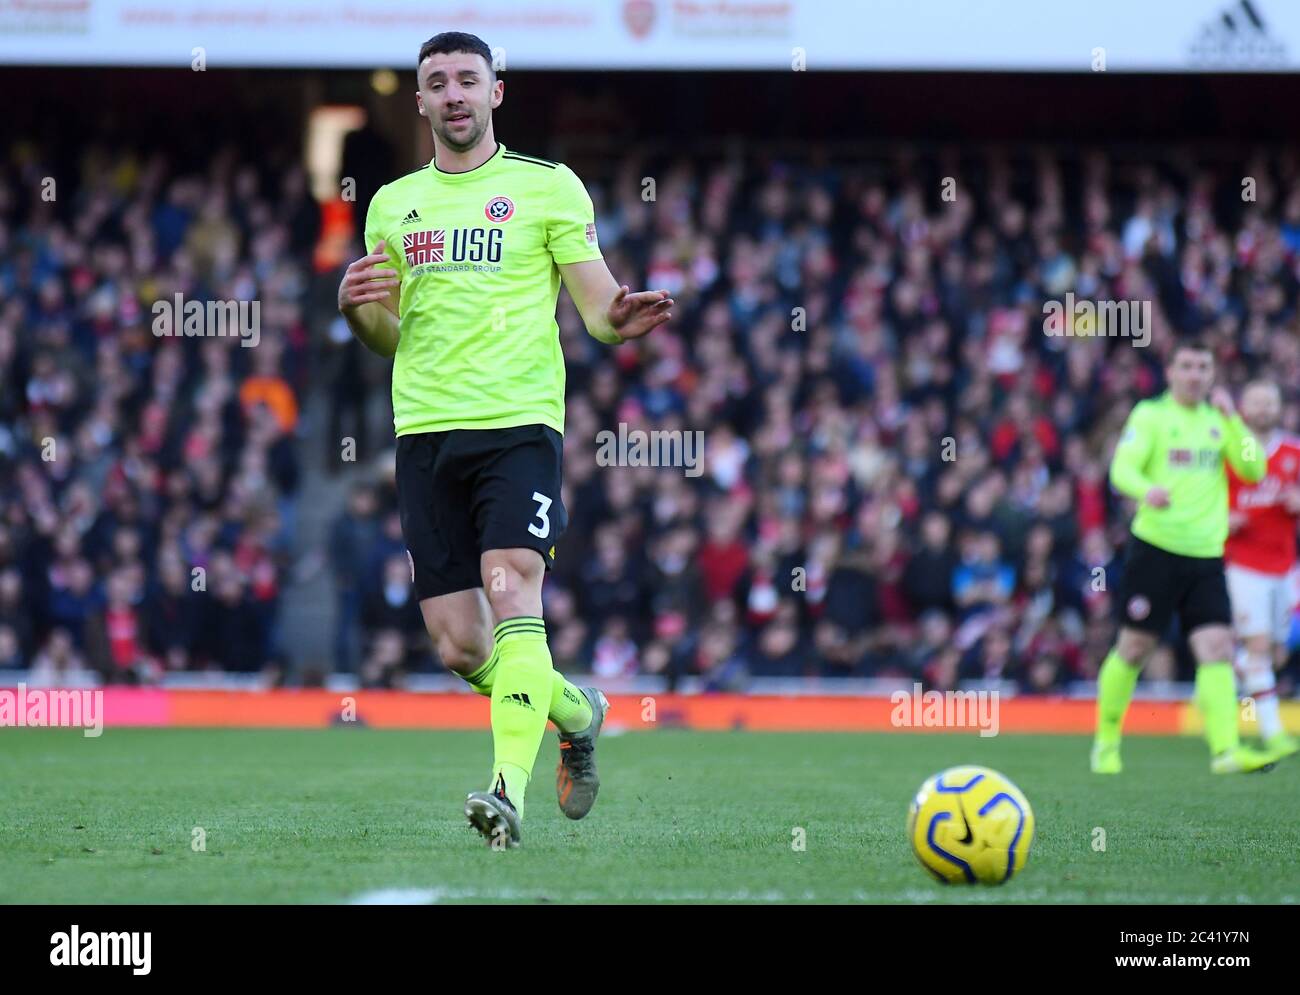 LONDON, ENGLAND - JANUARY 18, 2020: Enda Stevens of Sheffield pictured during the 2019/20 Premier League game between Arsenal FC and Sheffield United FC at Emirates Stadium. Stock Photo